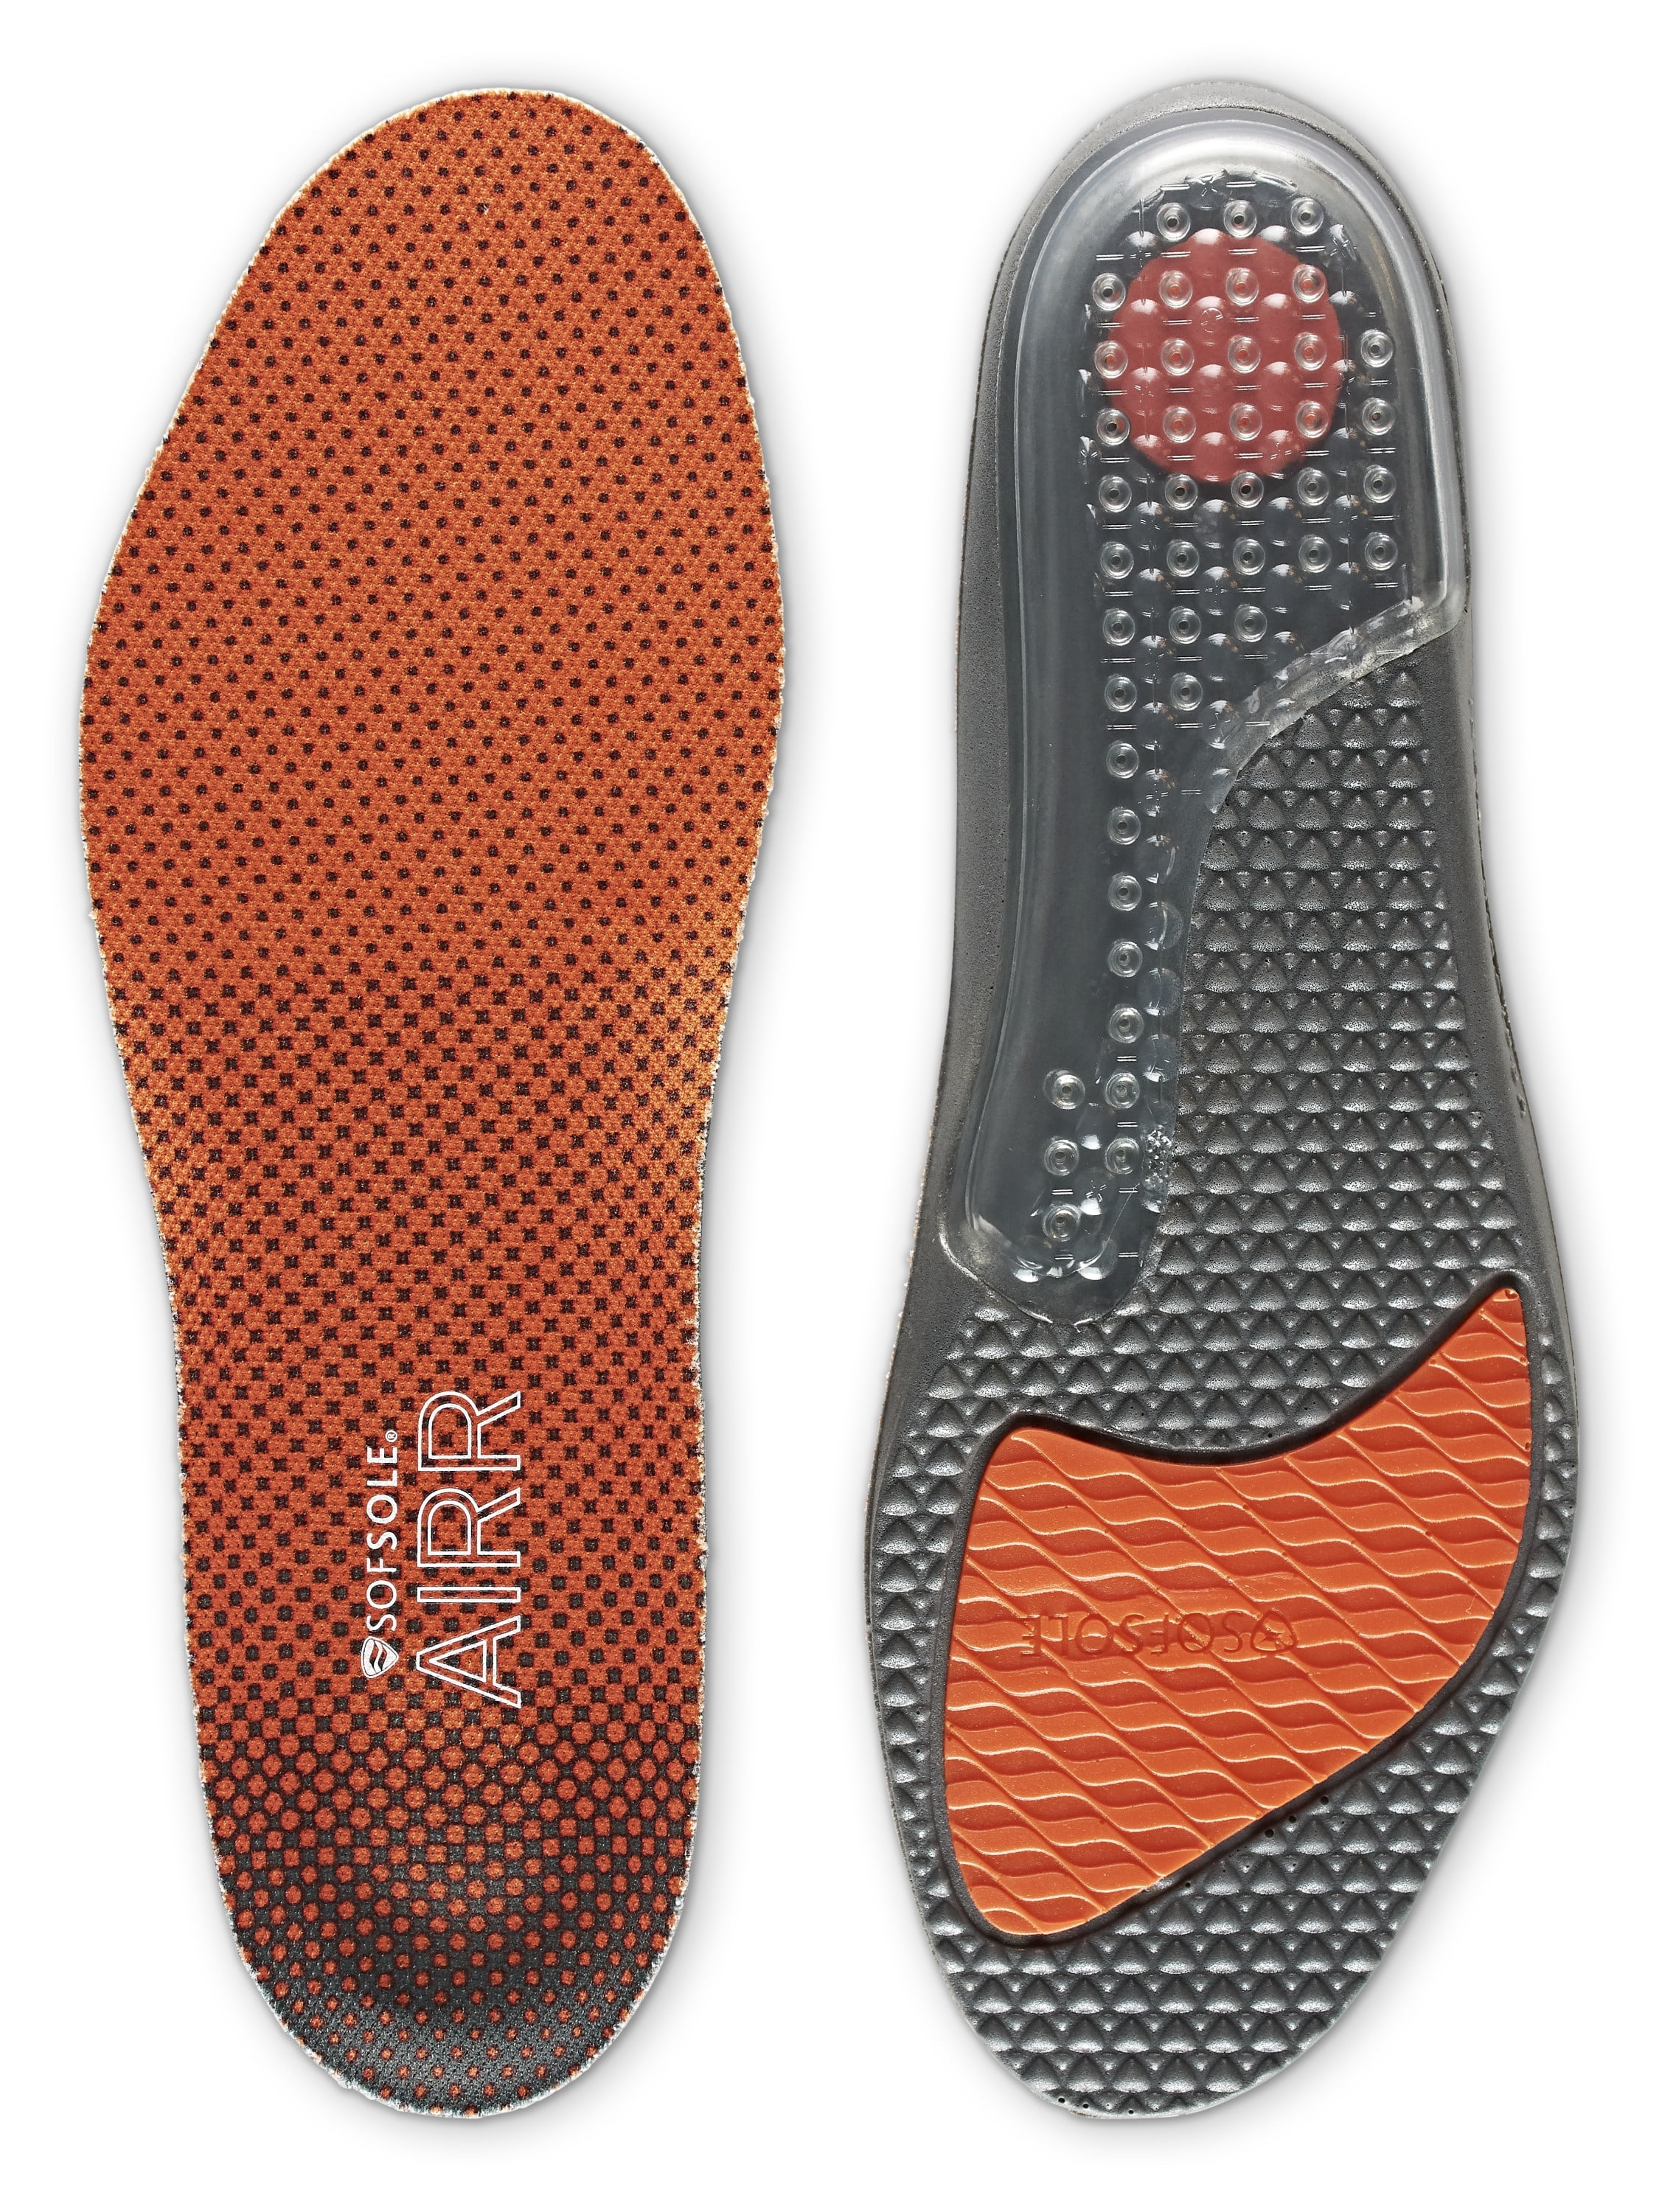 NEW Sof Sole Airr Full Length Performance Gel Shoe Insole Mens Size 11 12.5 